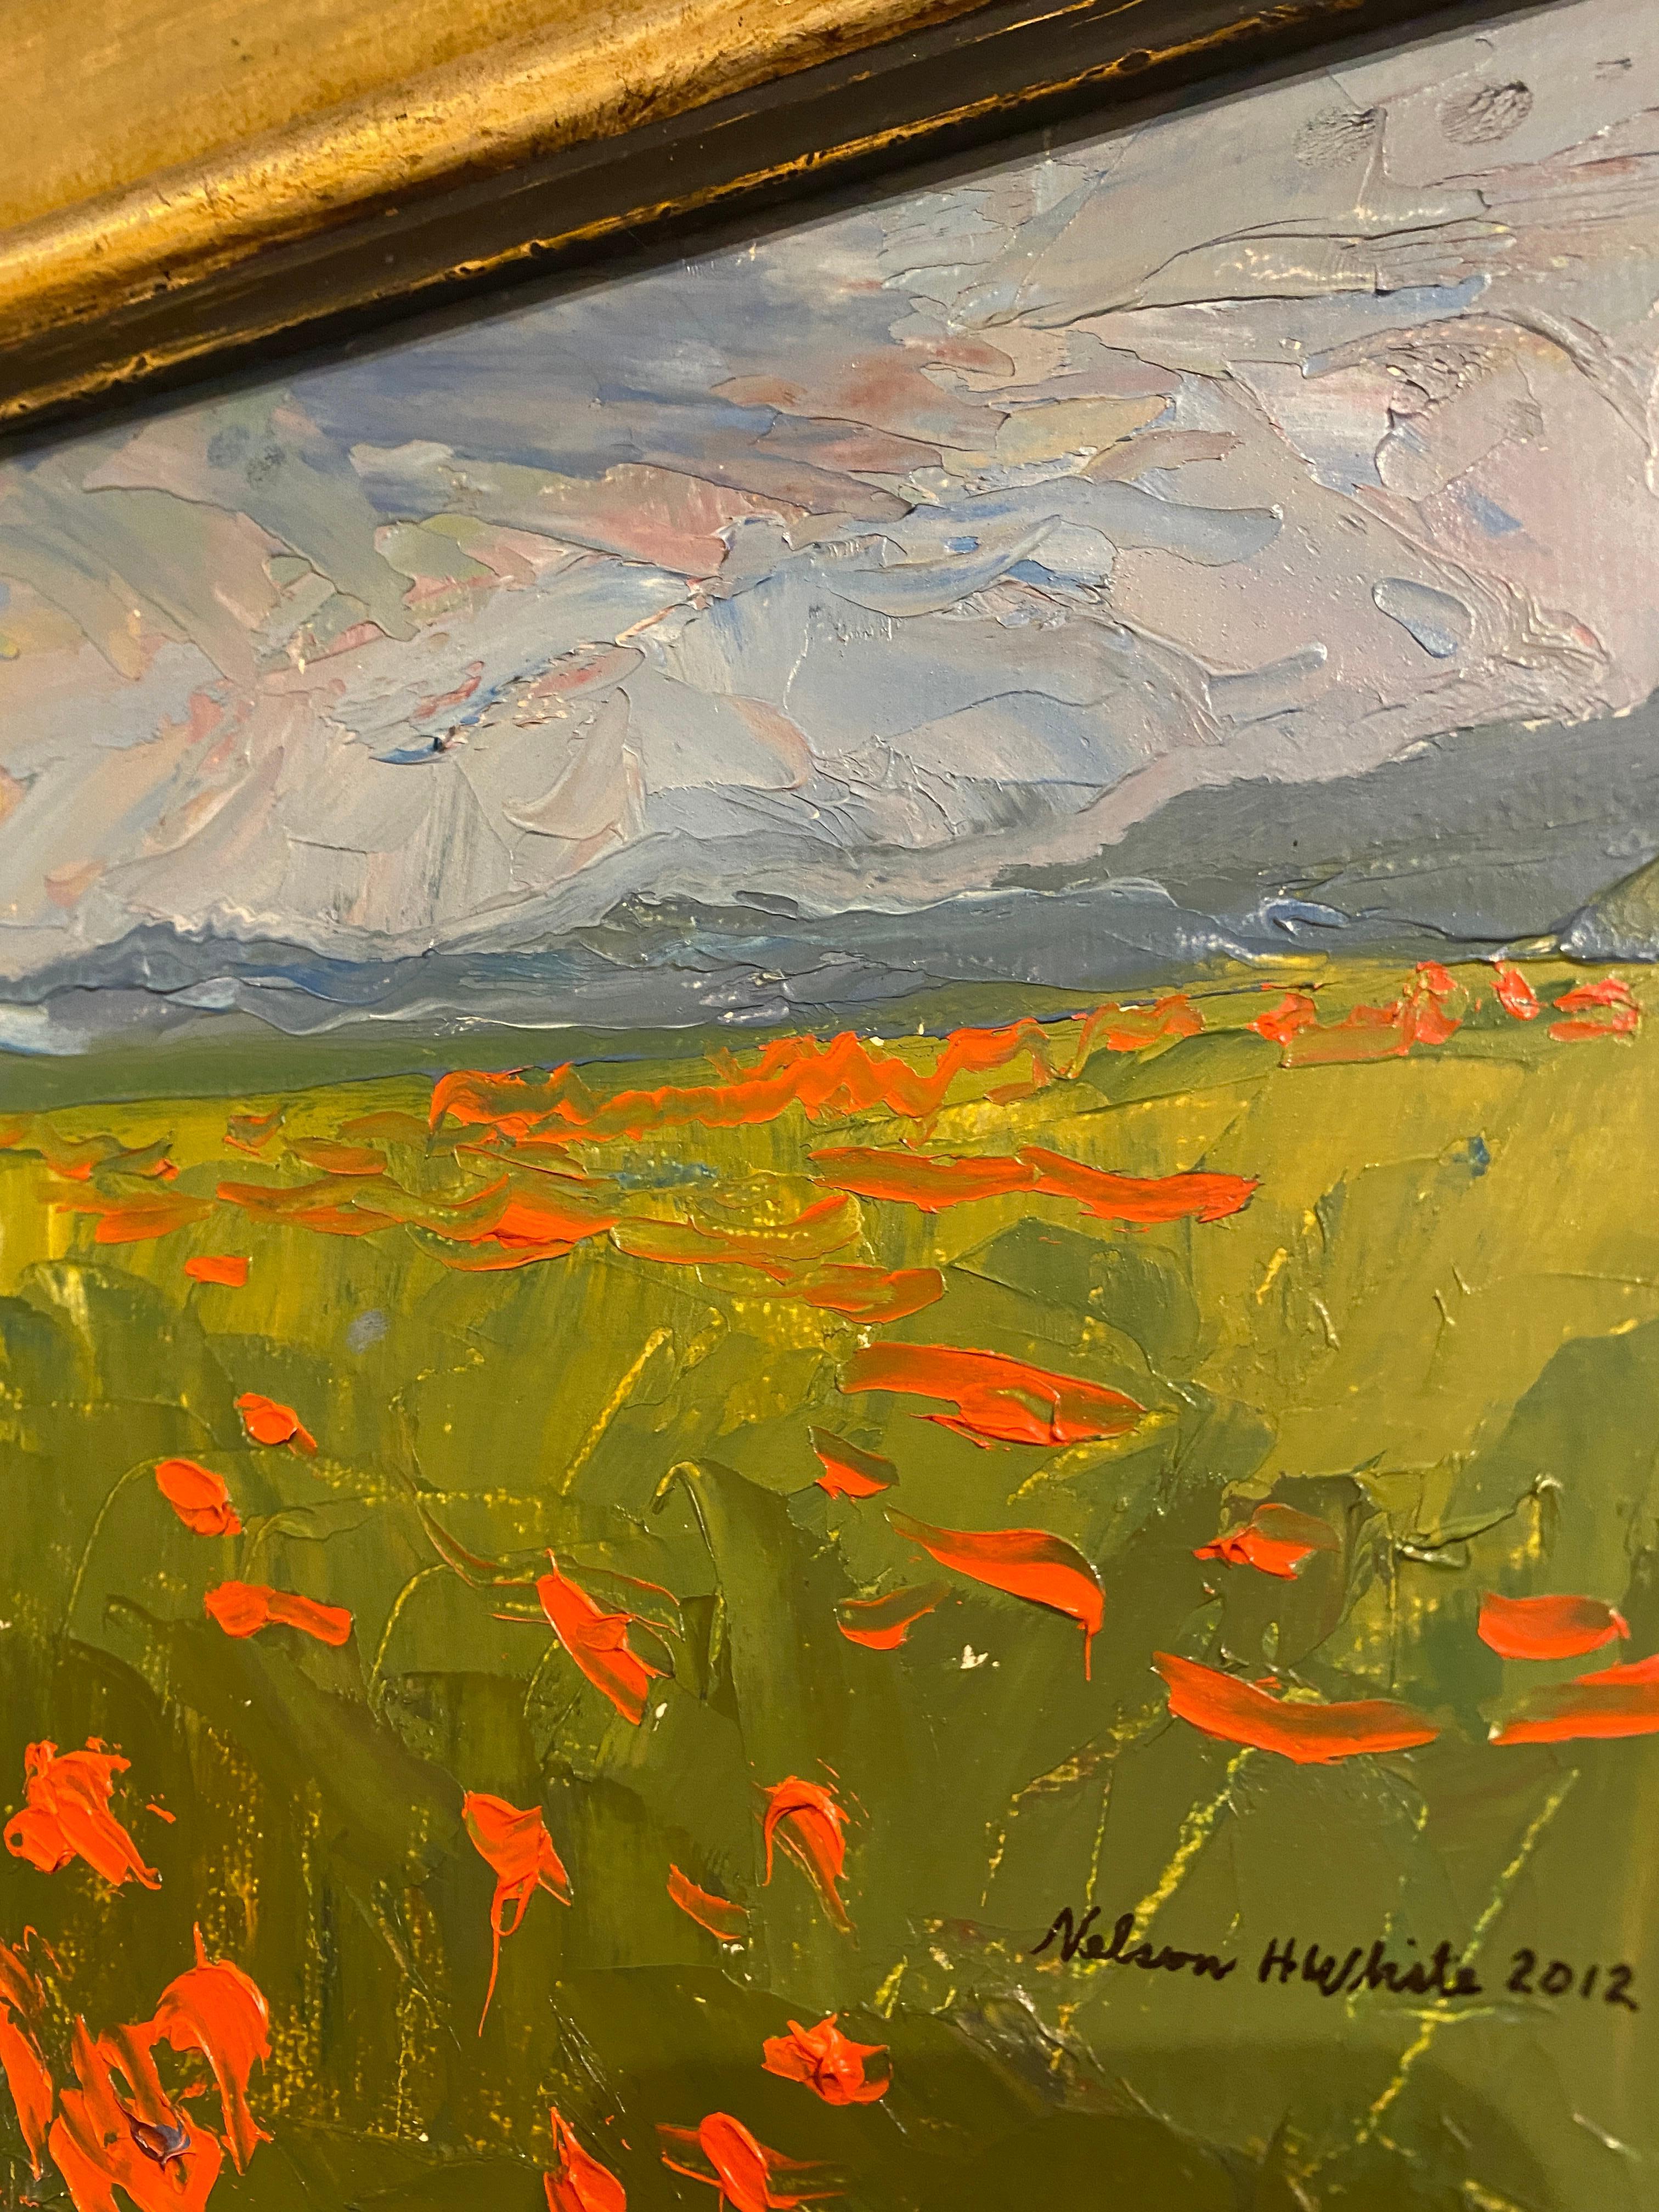 The Poppy Field at Torre del Lago - 05.26.2012 - American Impressionist Painting by Nelson H. White